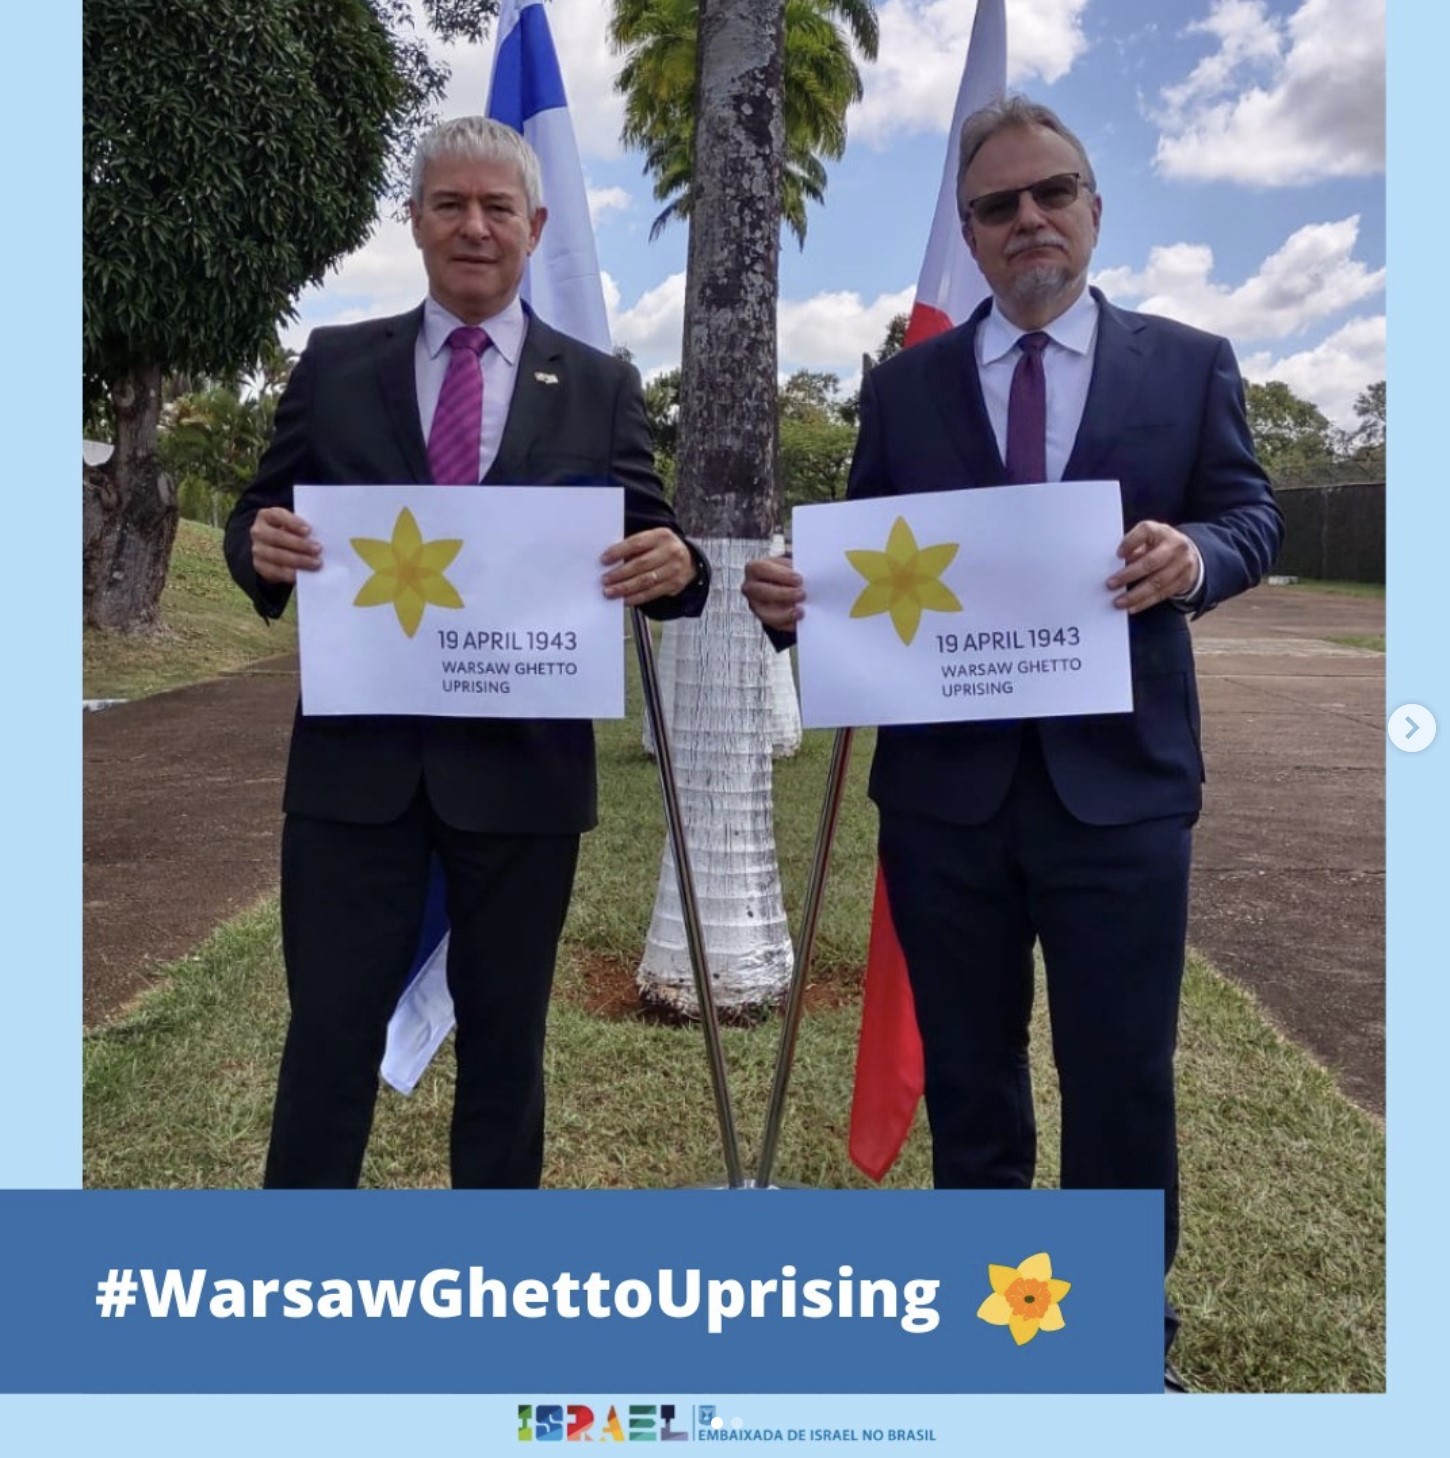 Two men from Israeli embassy in Brasil are standing with Warsaw Ghetto Uprising Campaign posters in English.